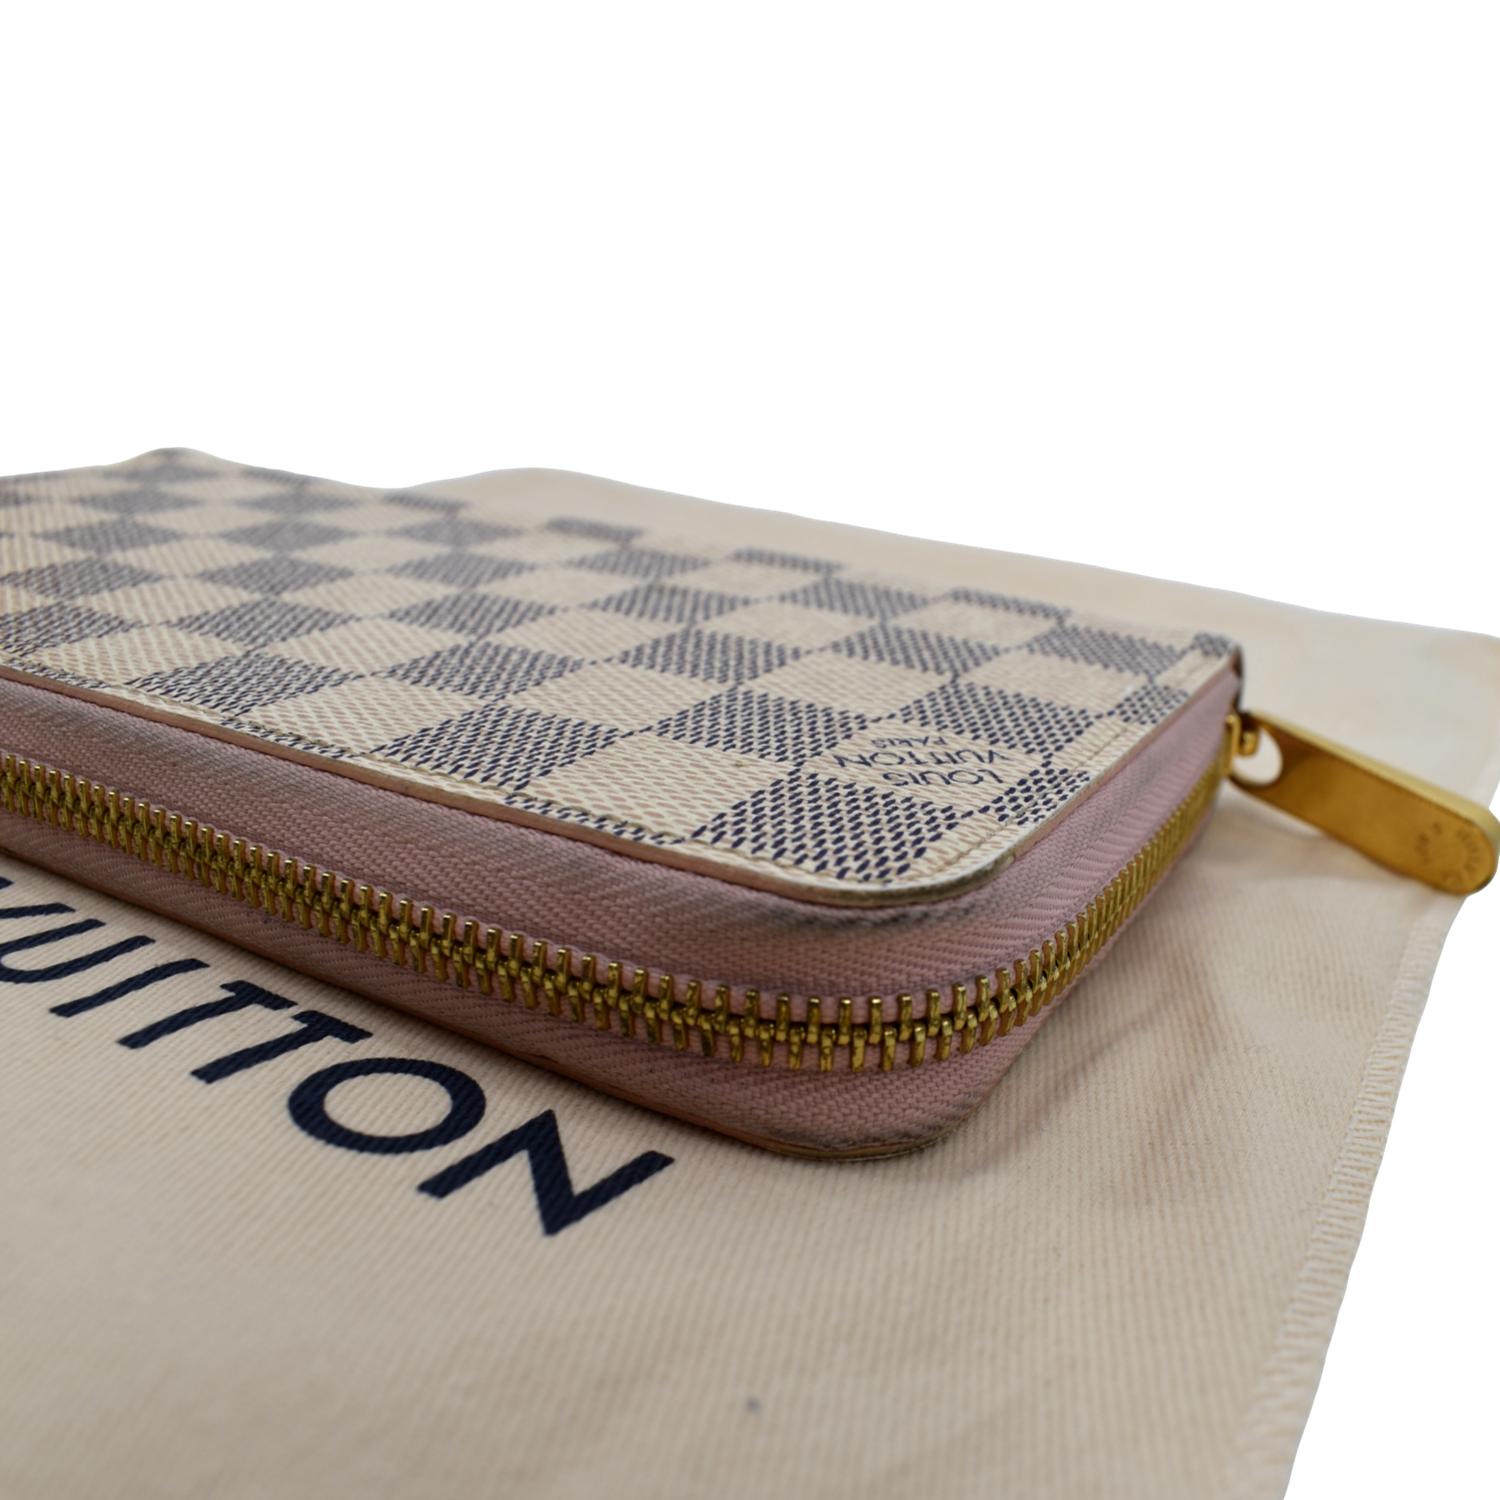 Wallet Louis Vuitton White in Not specified - 25561785